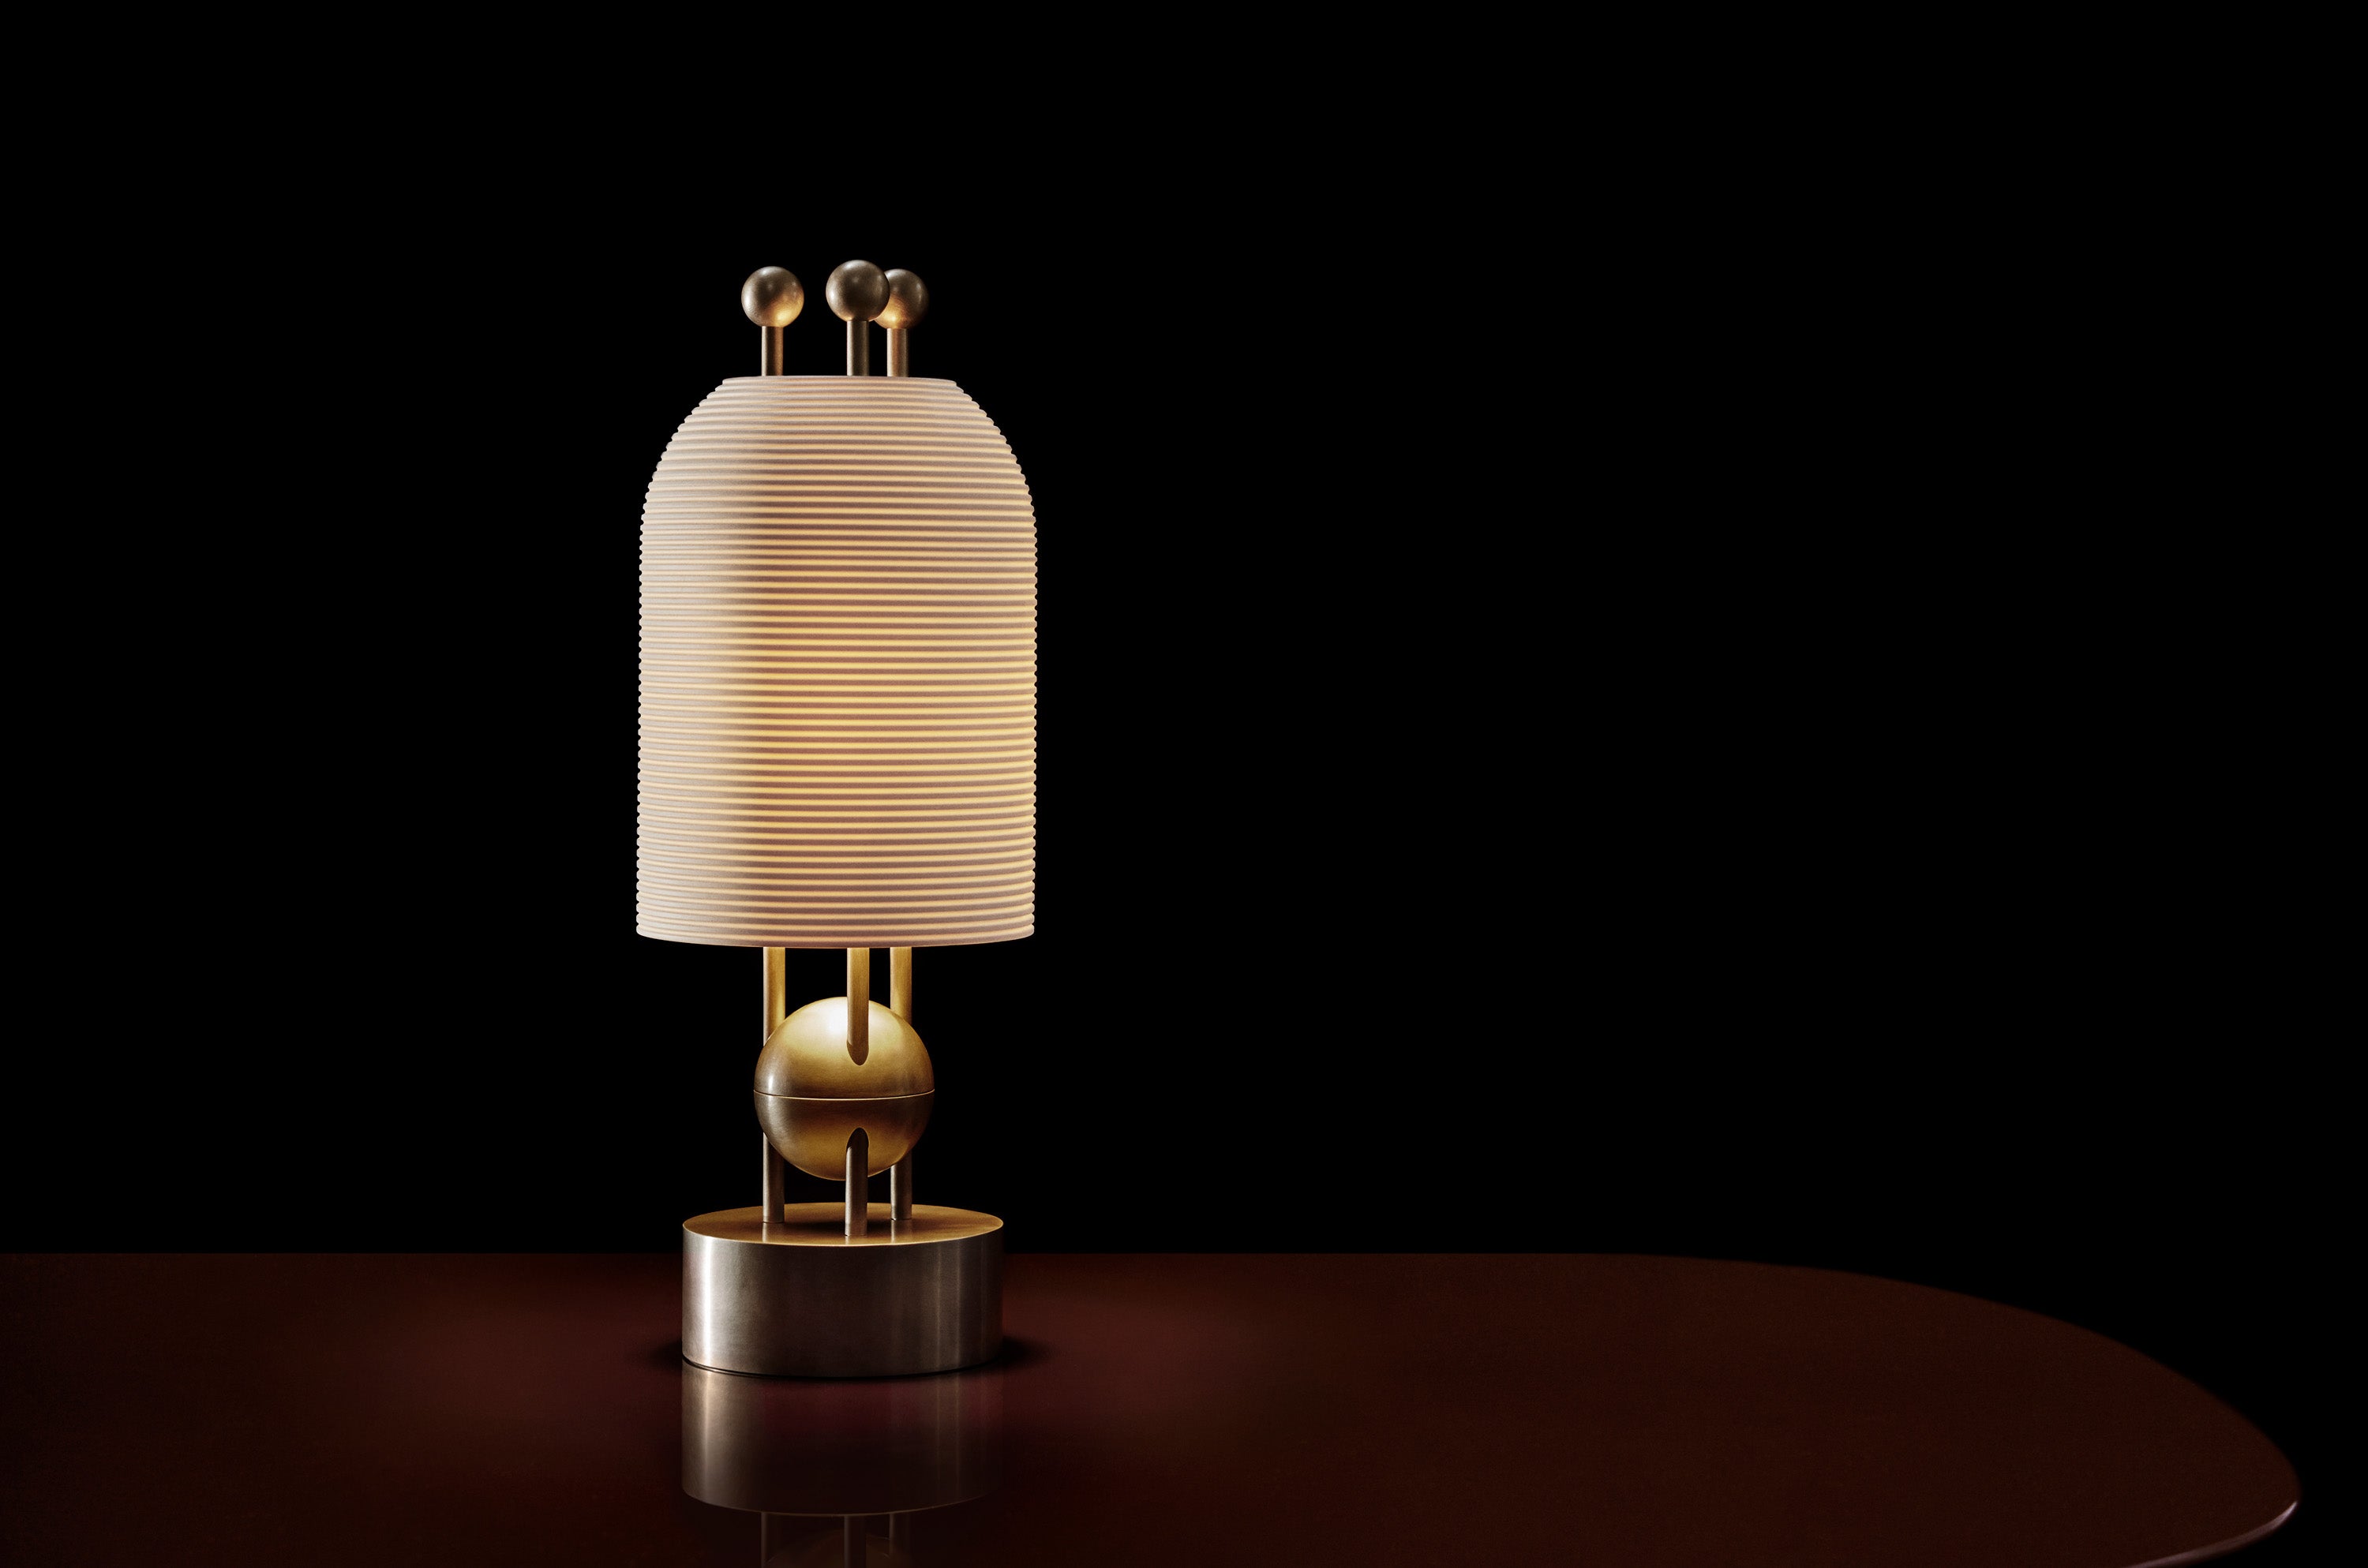 LANTERN table lamp in Tarnished Silver / Aged Brass finish.